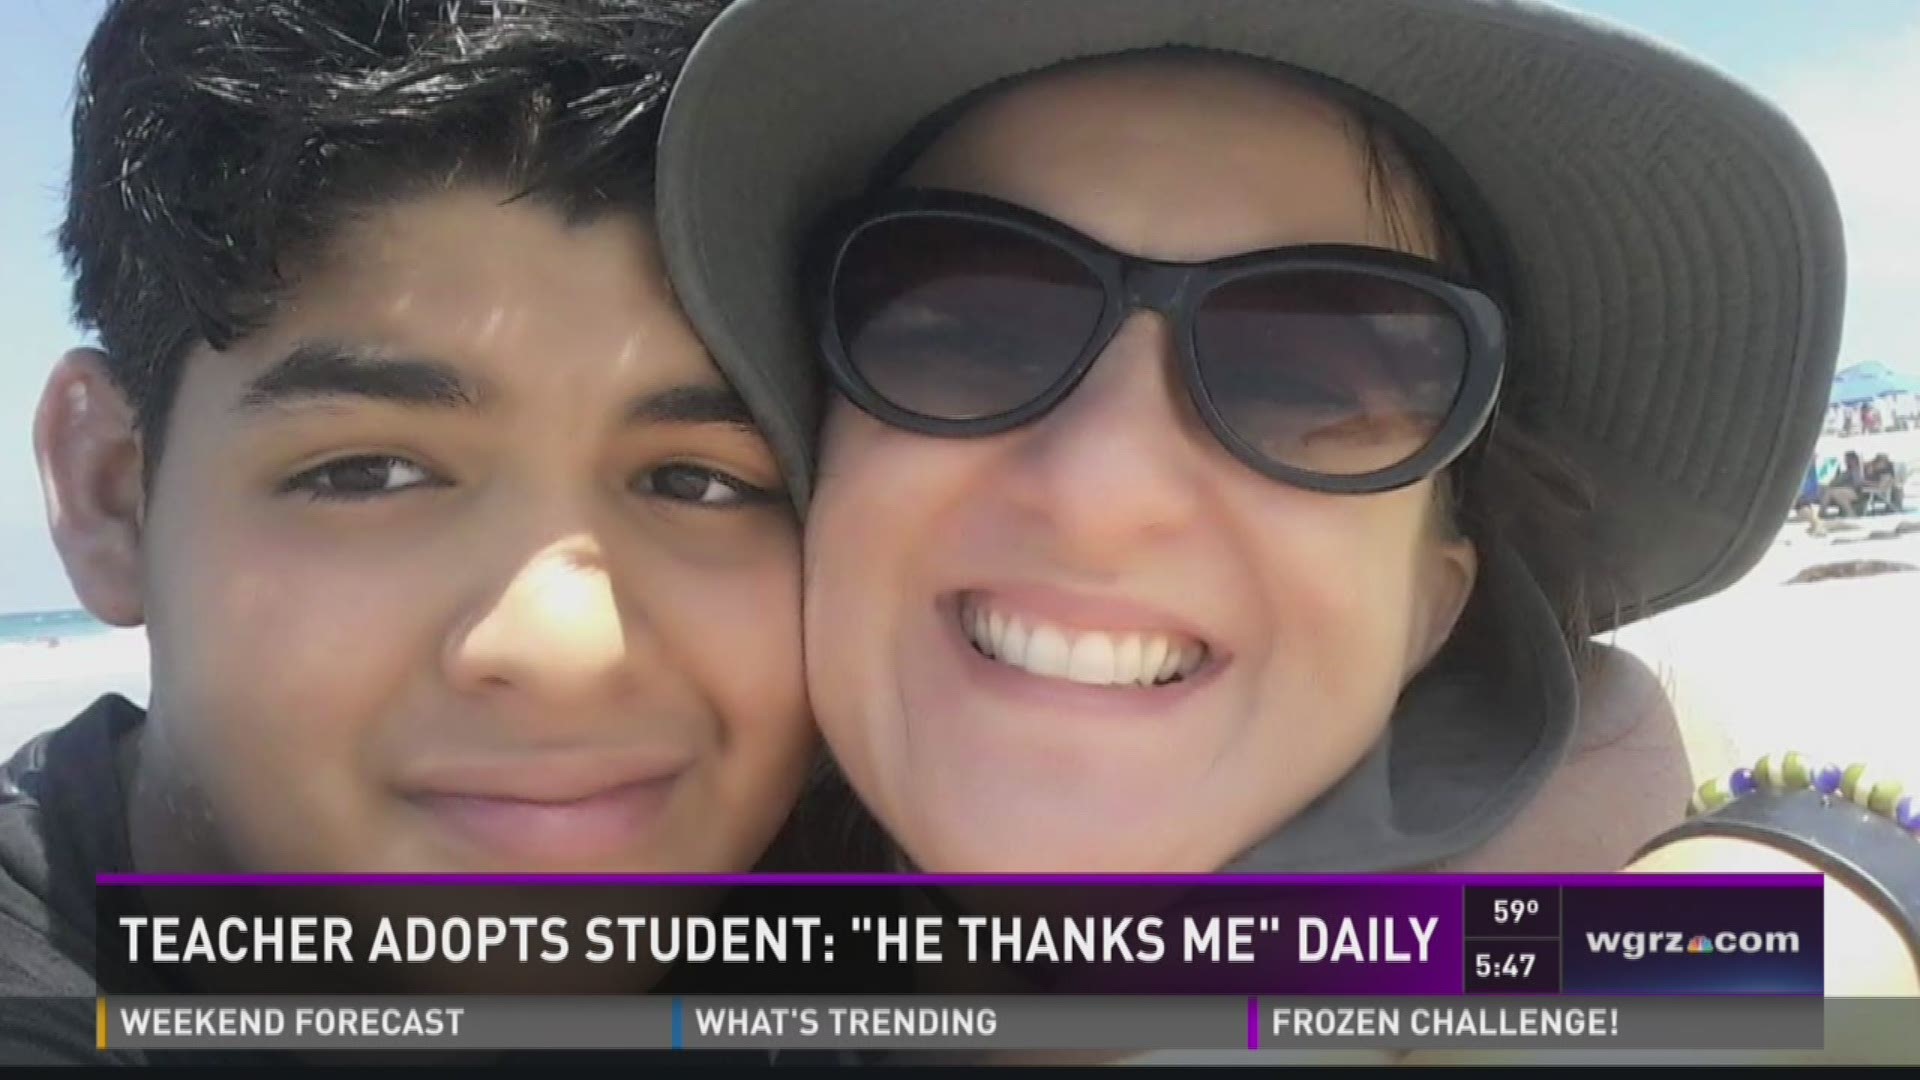 Teacher Adopts Student: "He Thanks Me" Daily